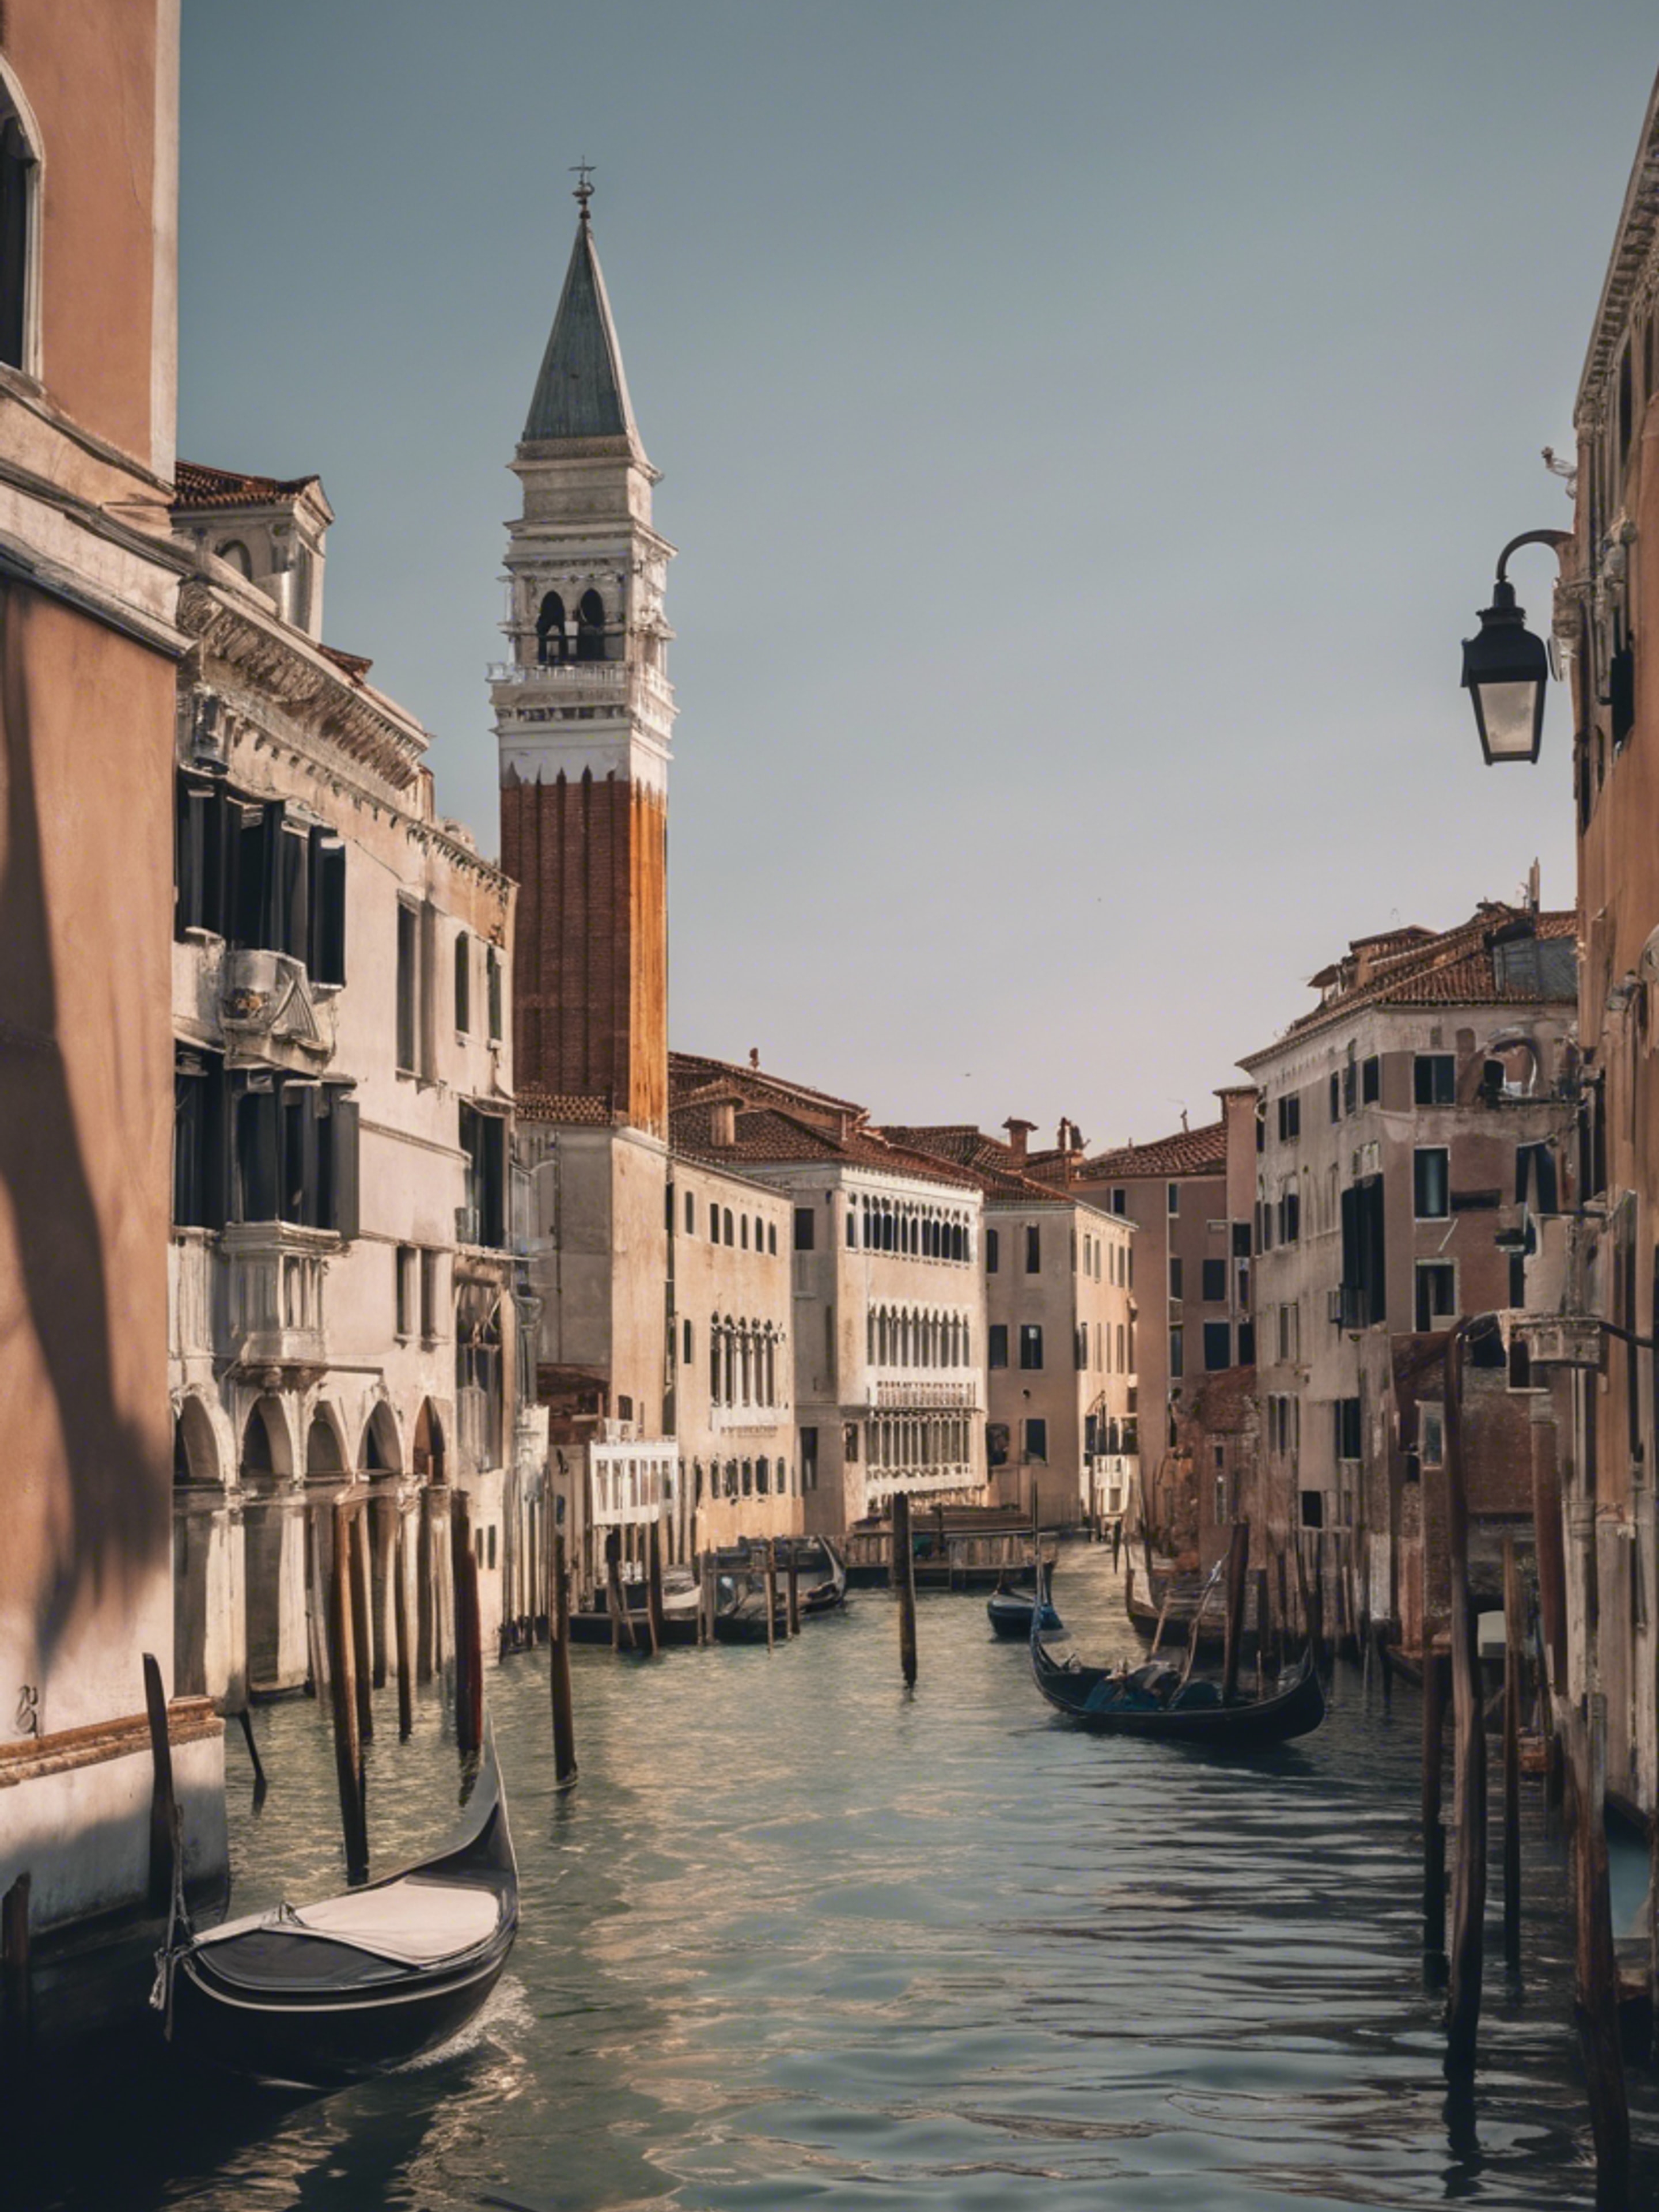 The enchanting skyline of Venice, showing the harmony of waterways and gothic architecture. Tapet[ea568ee278994e97af3a]